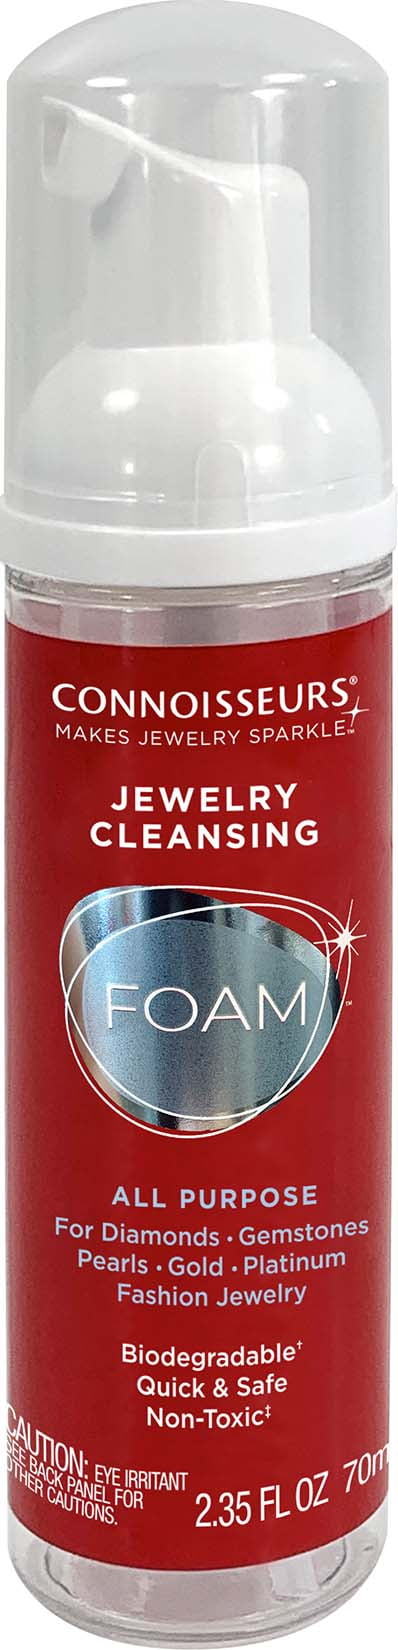 Connoisseurs All-purpose Jewelry Foam Cleanser : Target